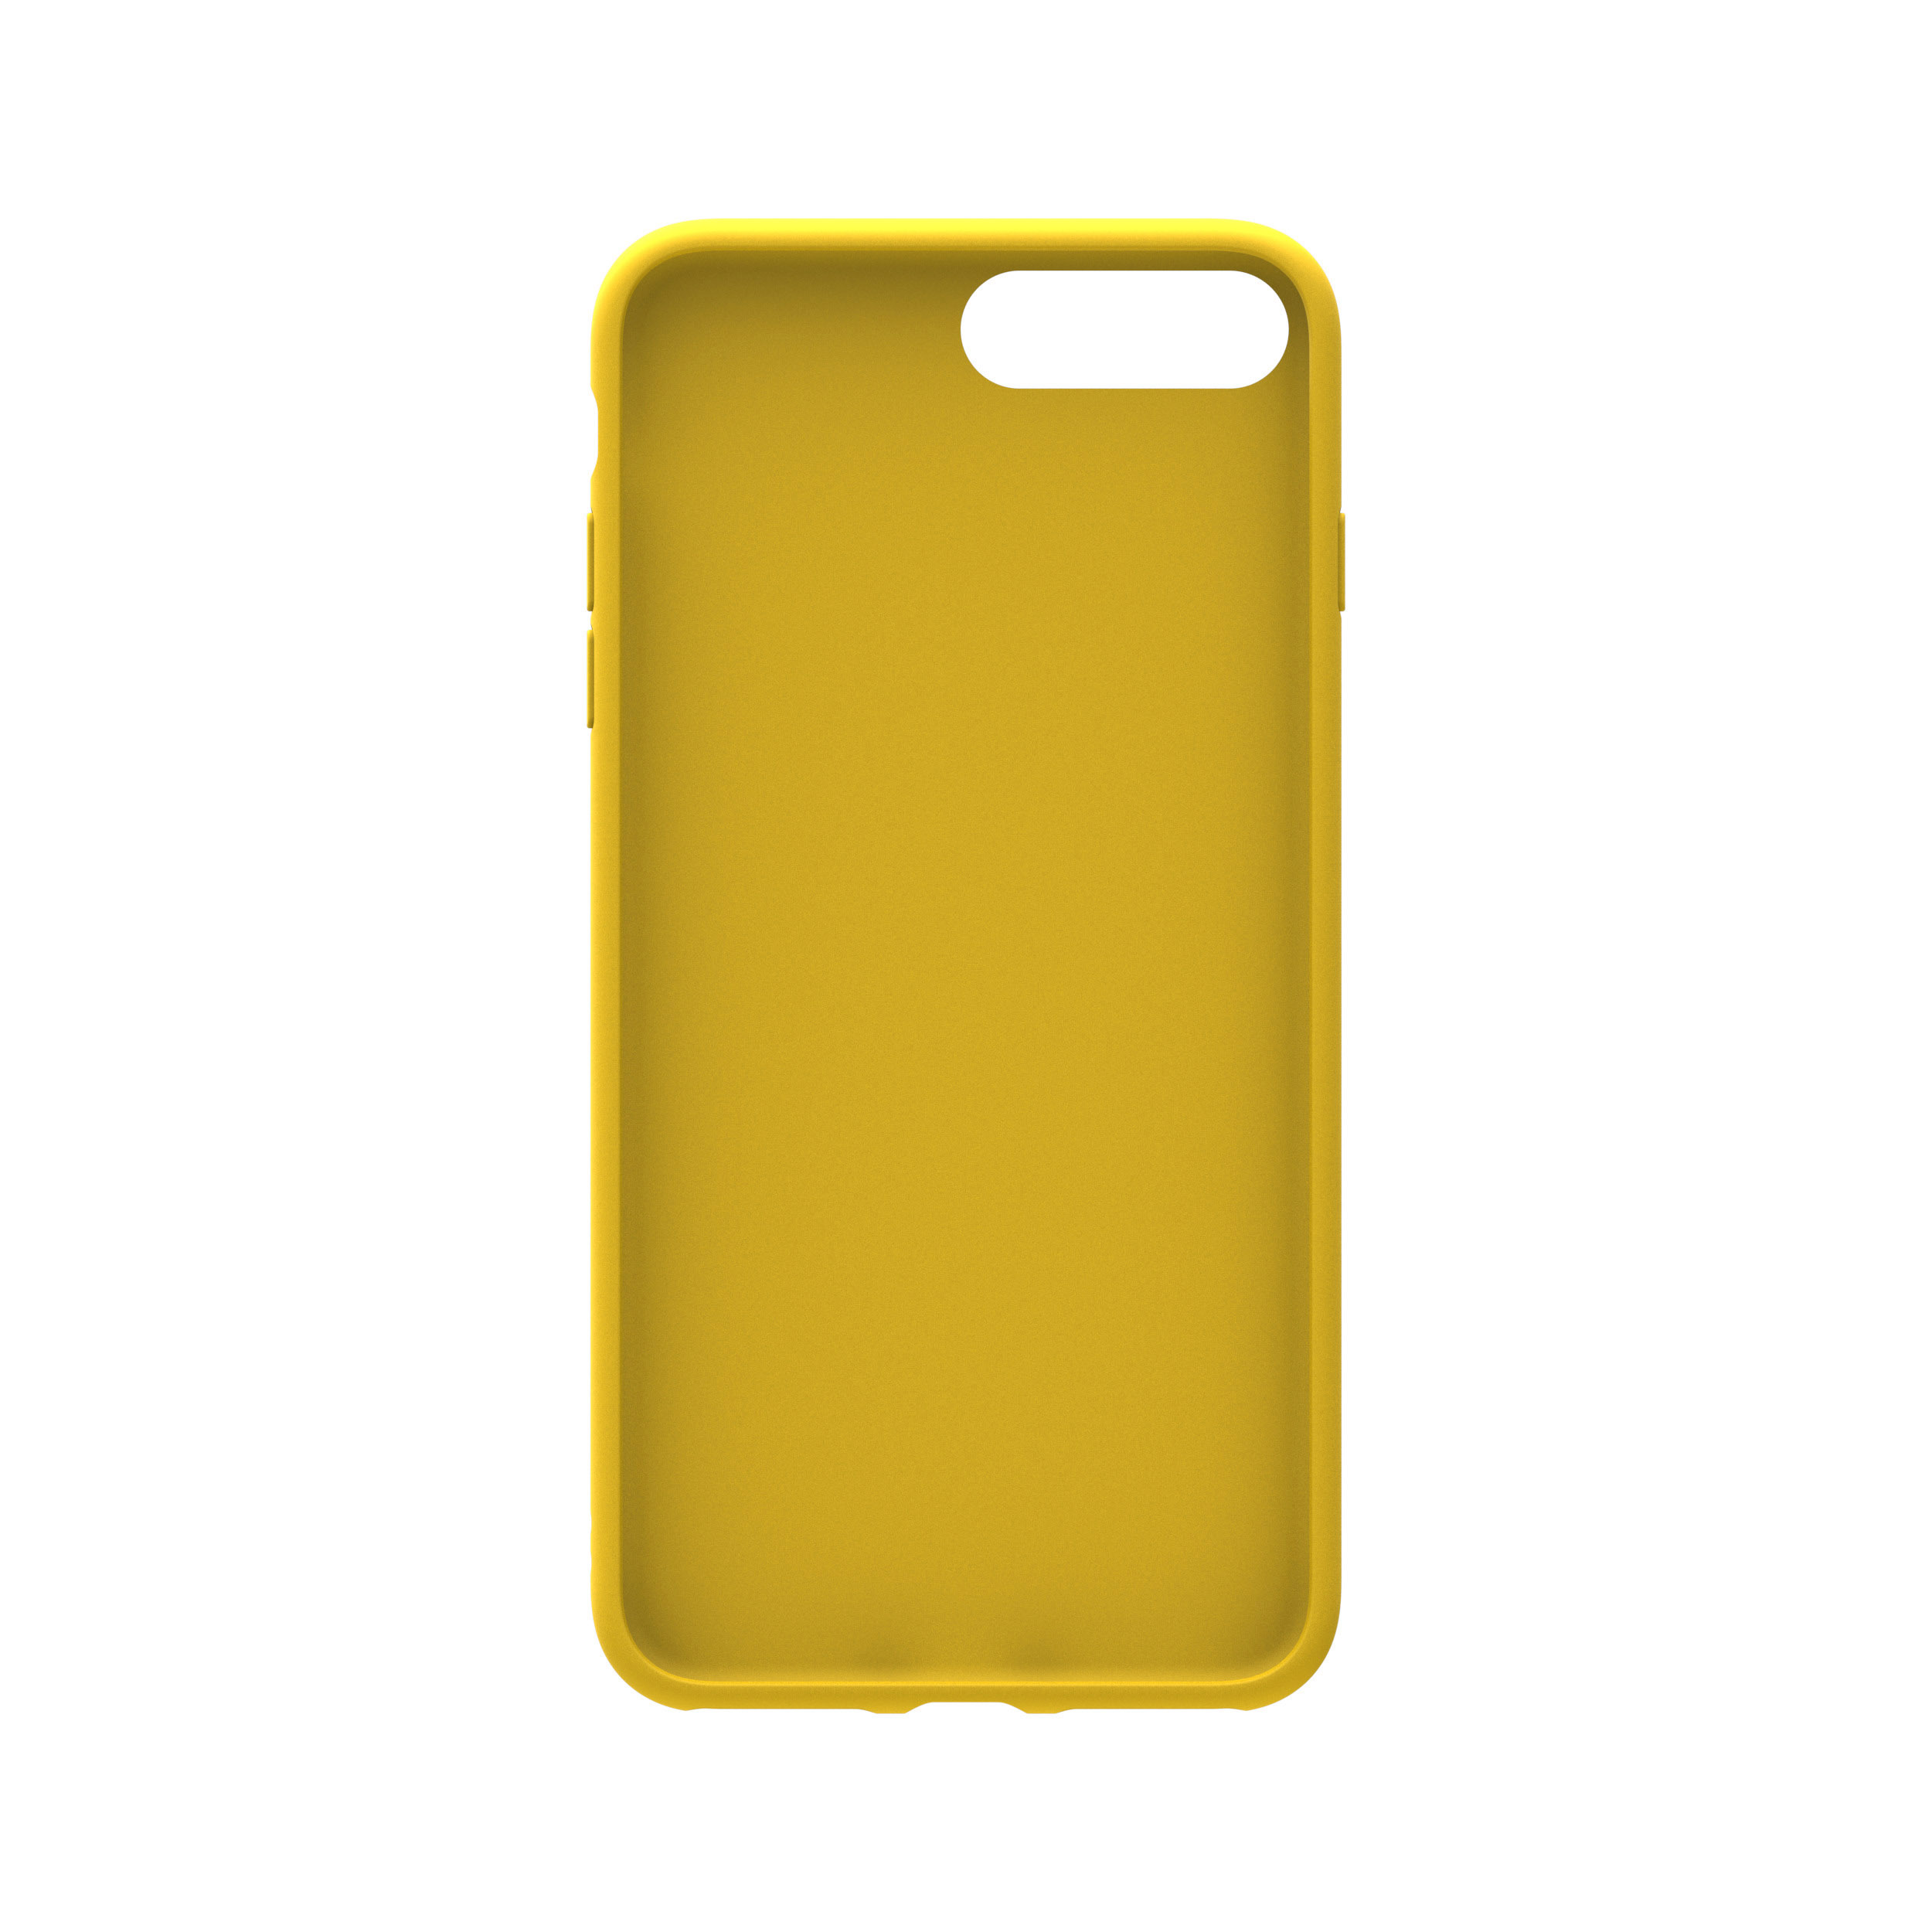 OR Gelb Backcover, 7 Apple, ORIGINALS iPhone Moulded Plus, iPhone Plus, Case, 6 ADIDAS Plus, 8 iPhone